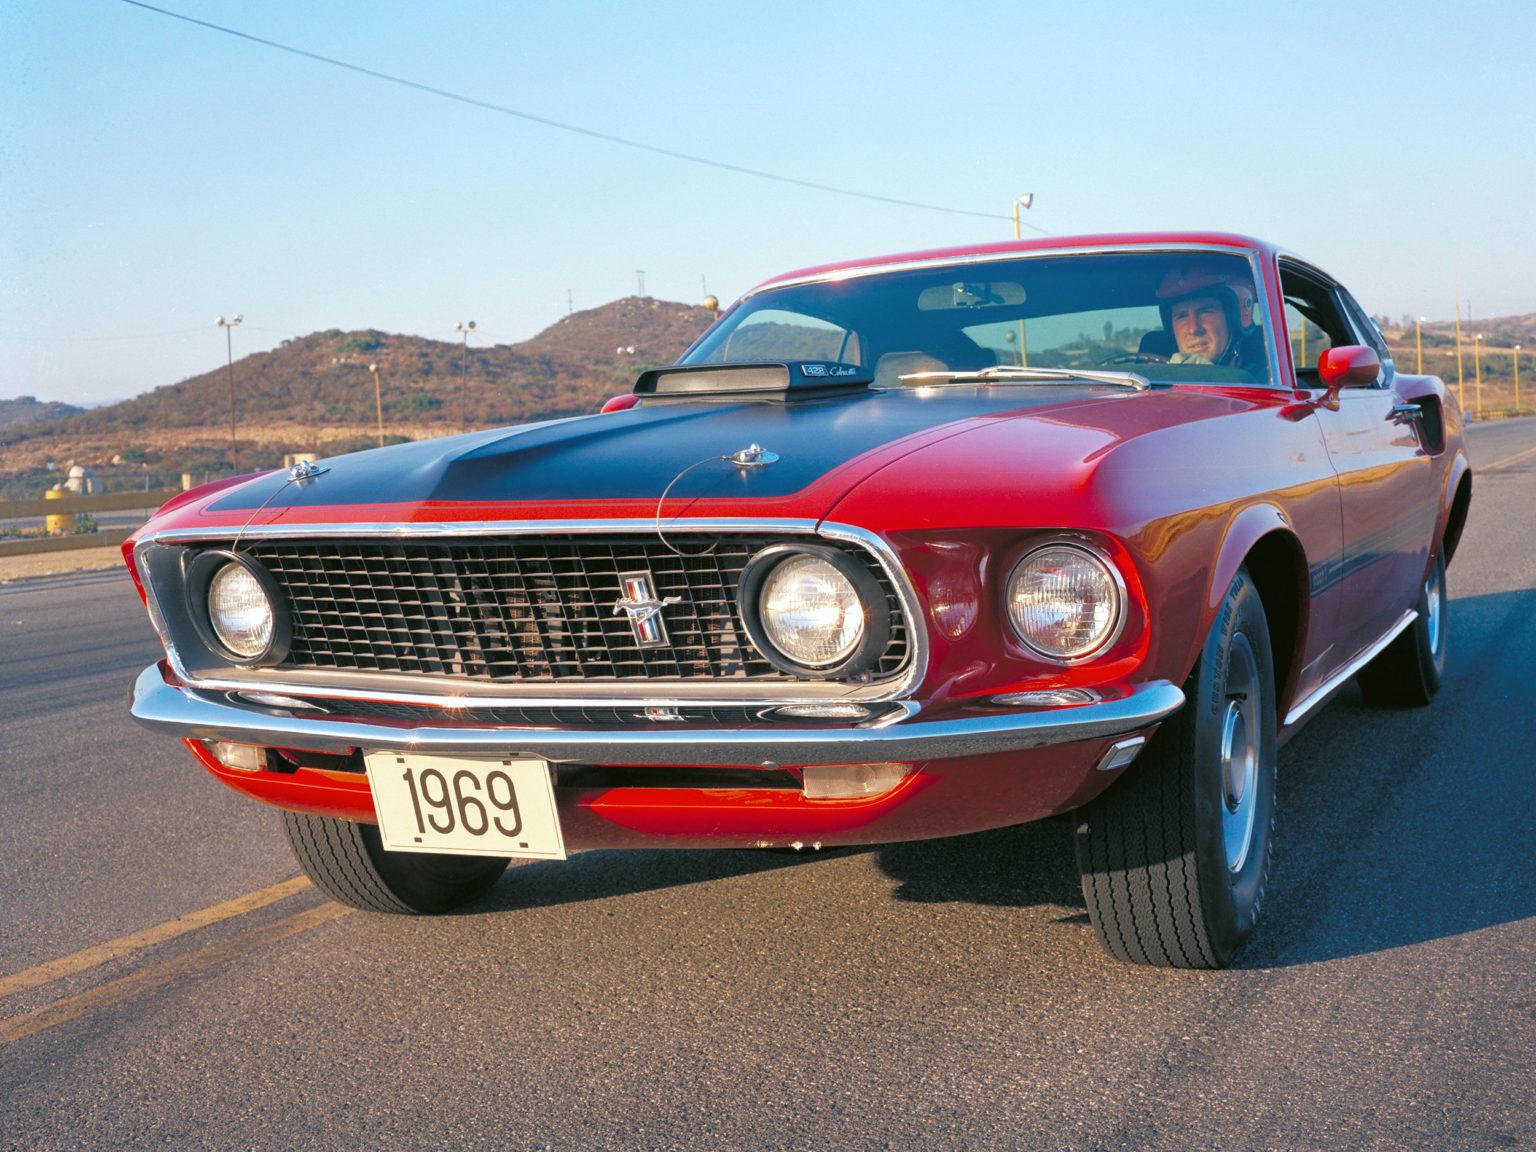 The Ford Mustang Mach 1 is the most iconic model lines in muscle car history.